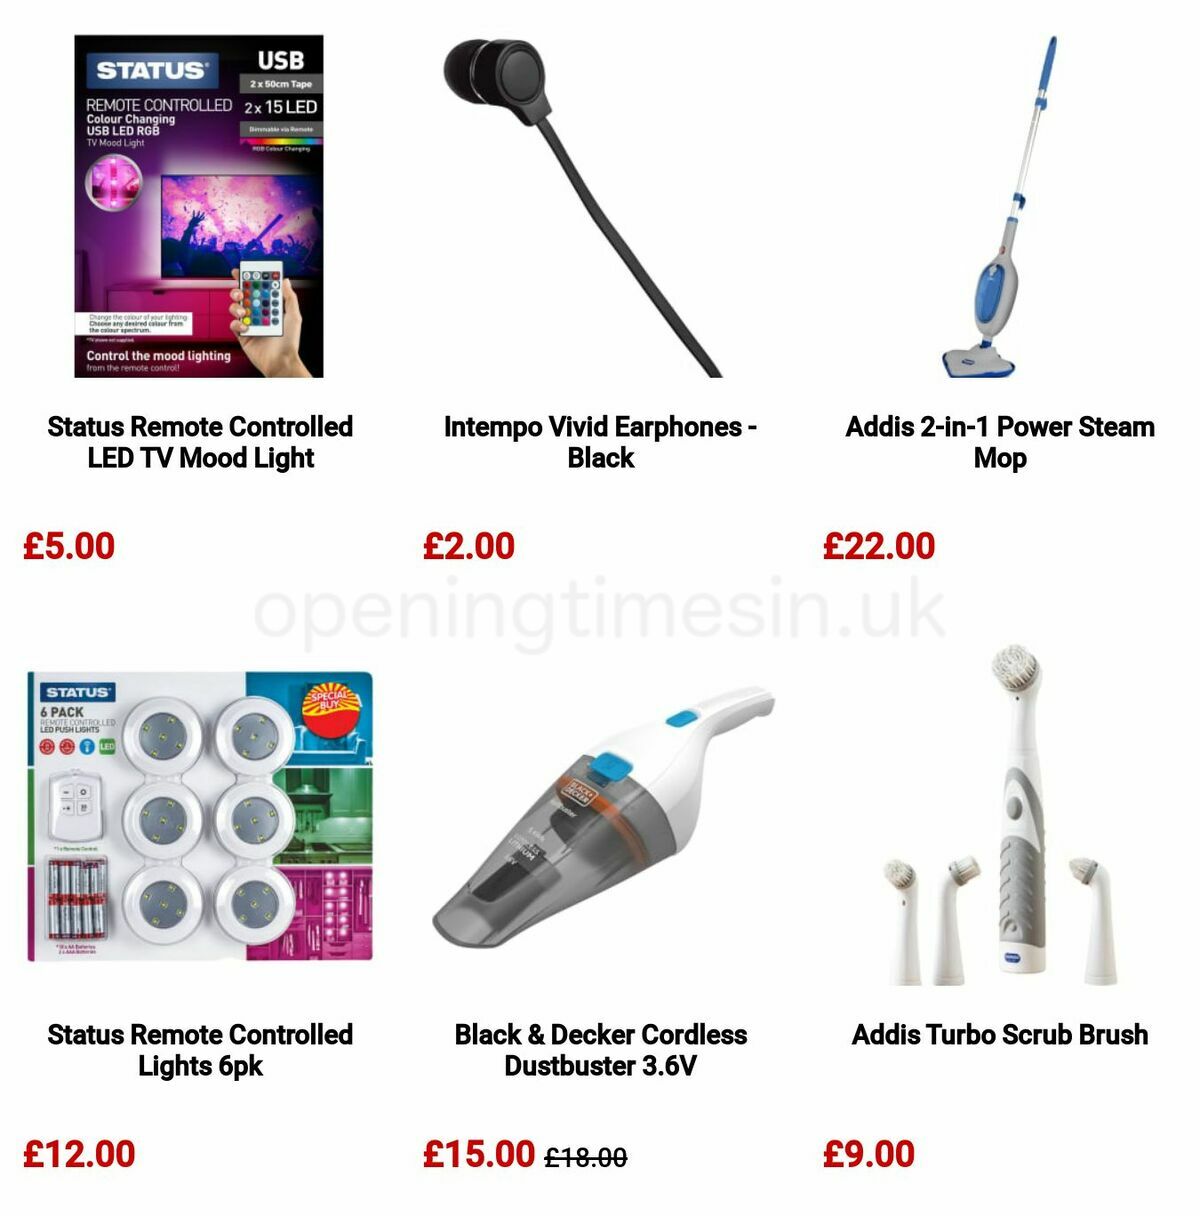 B&M Offers from 27 December